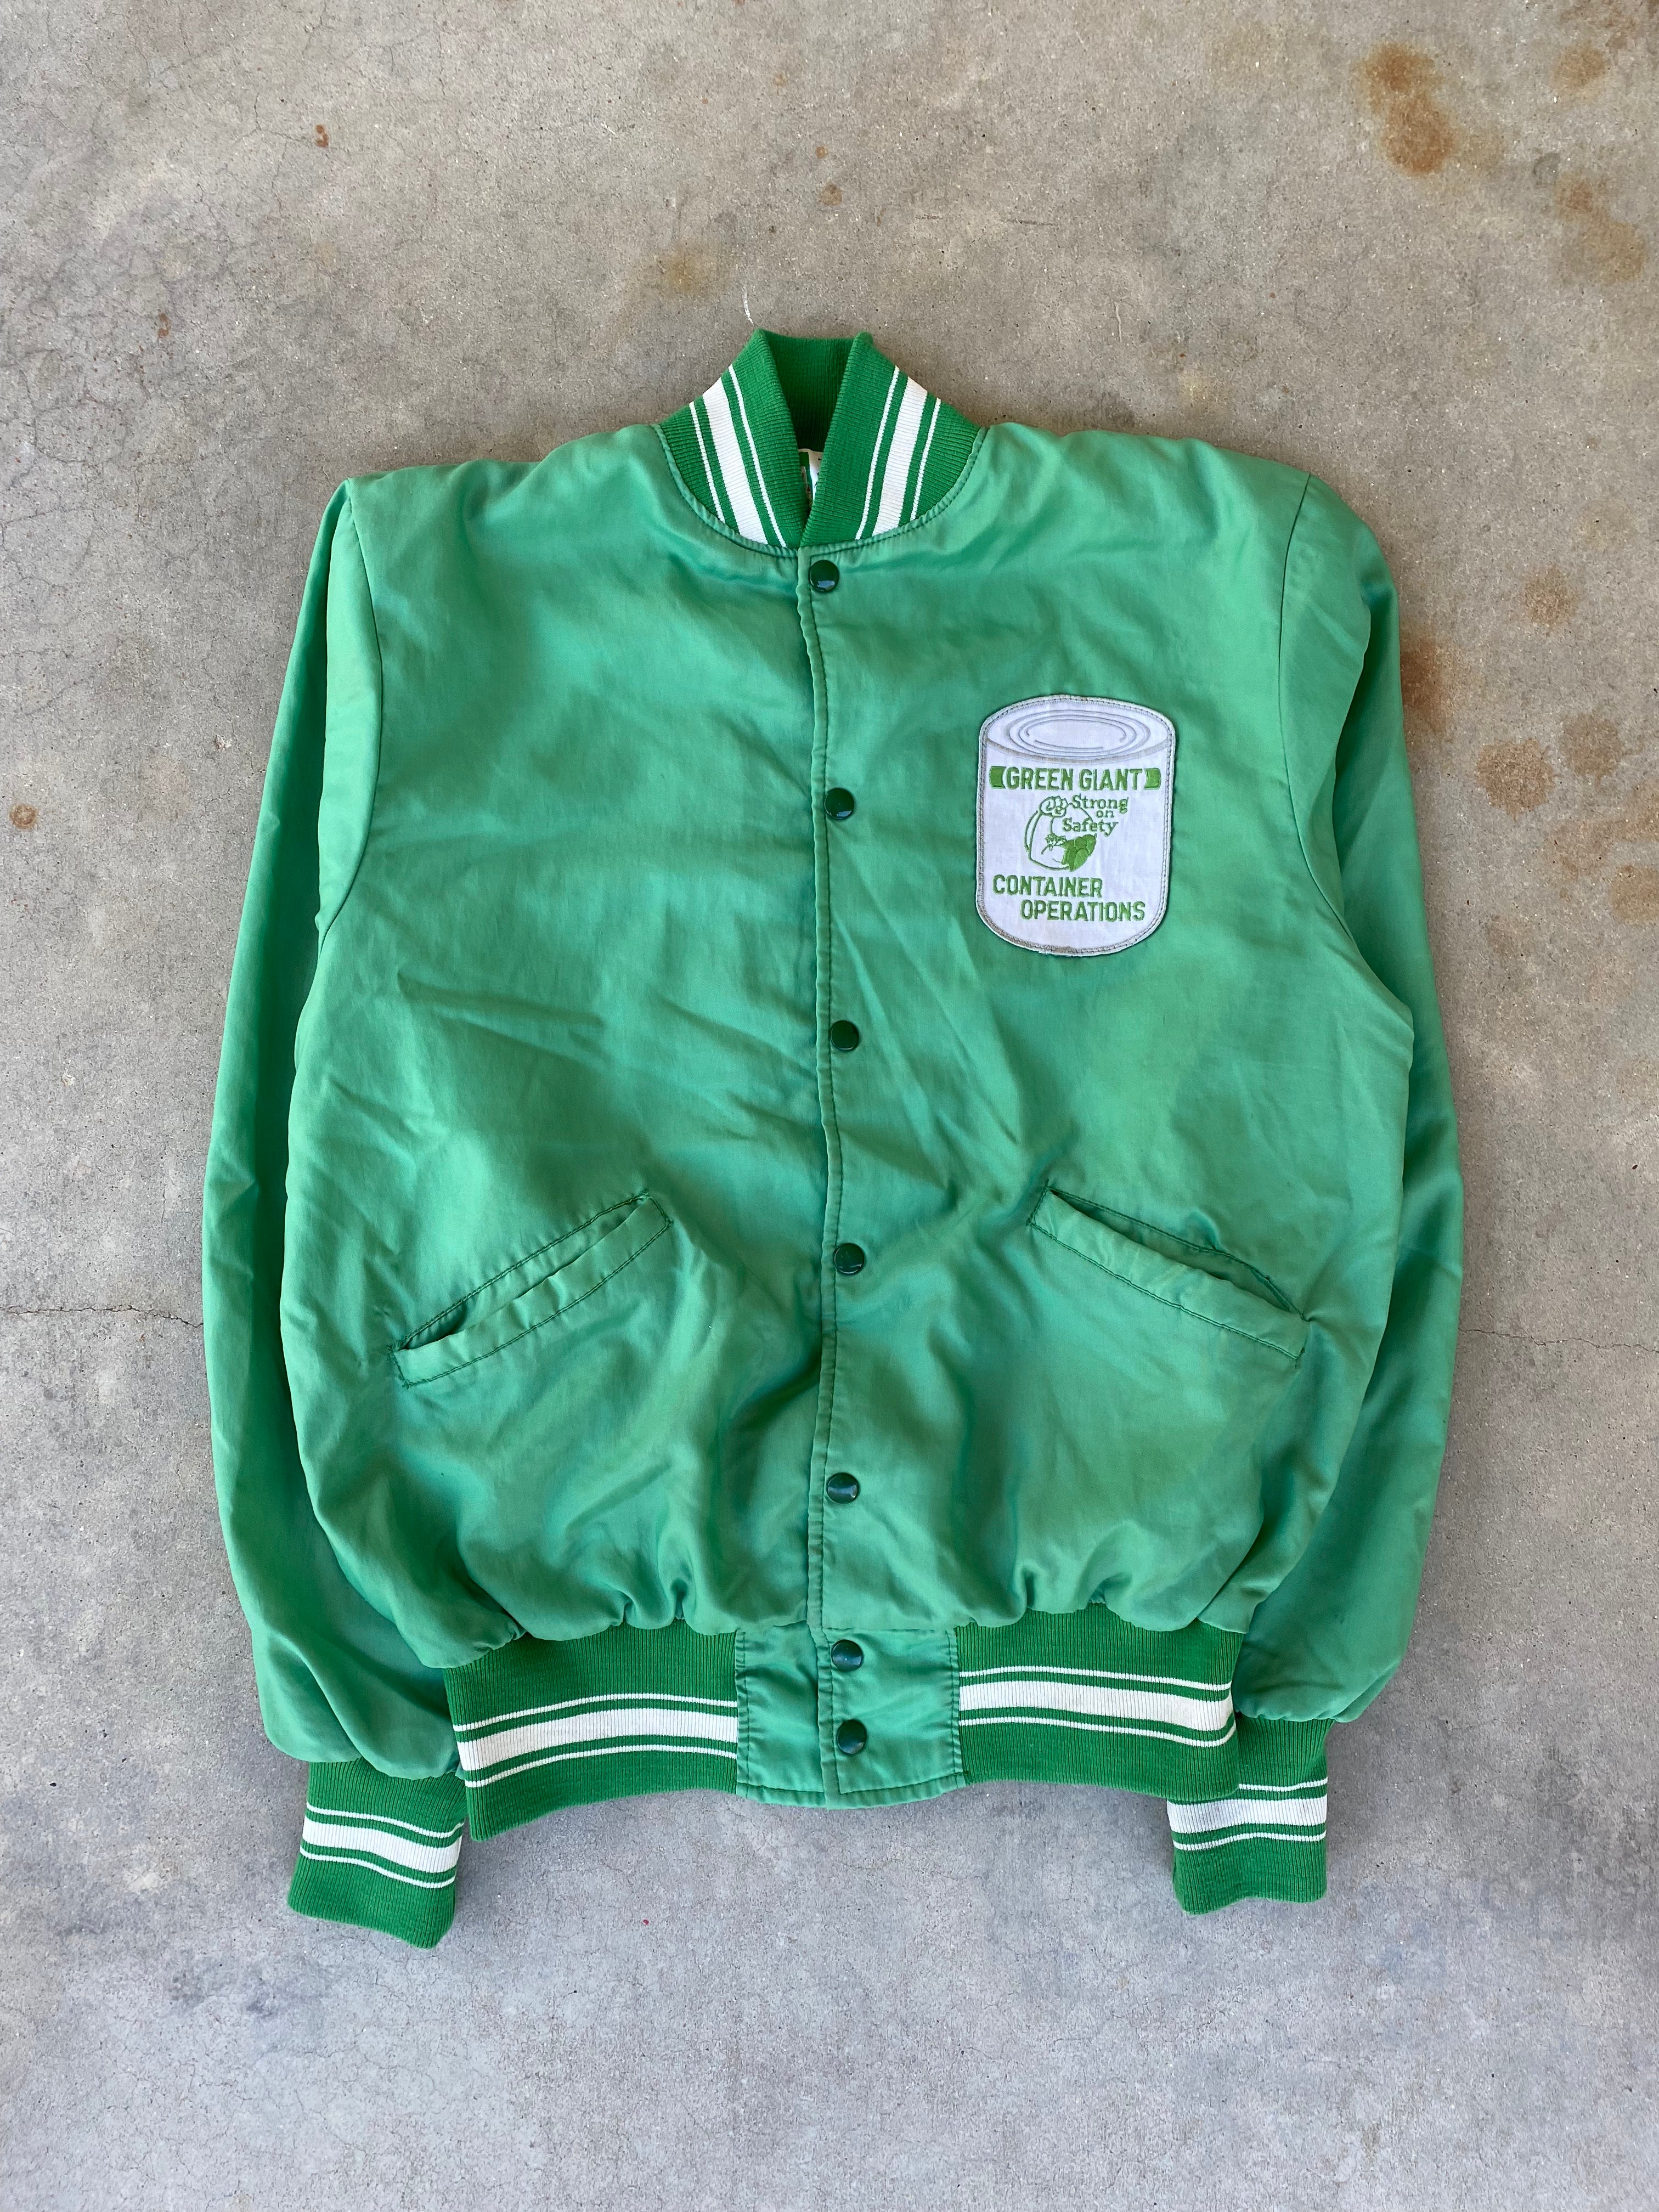 60s/70s Green Giant Container Operations Jacket